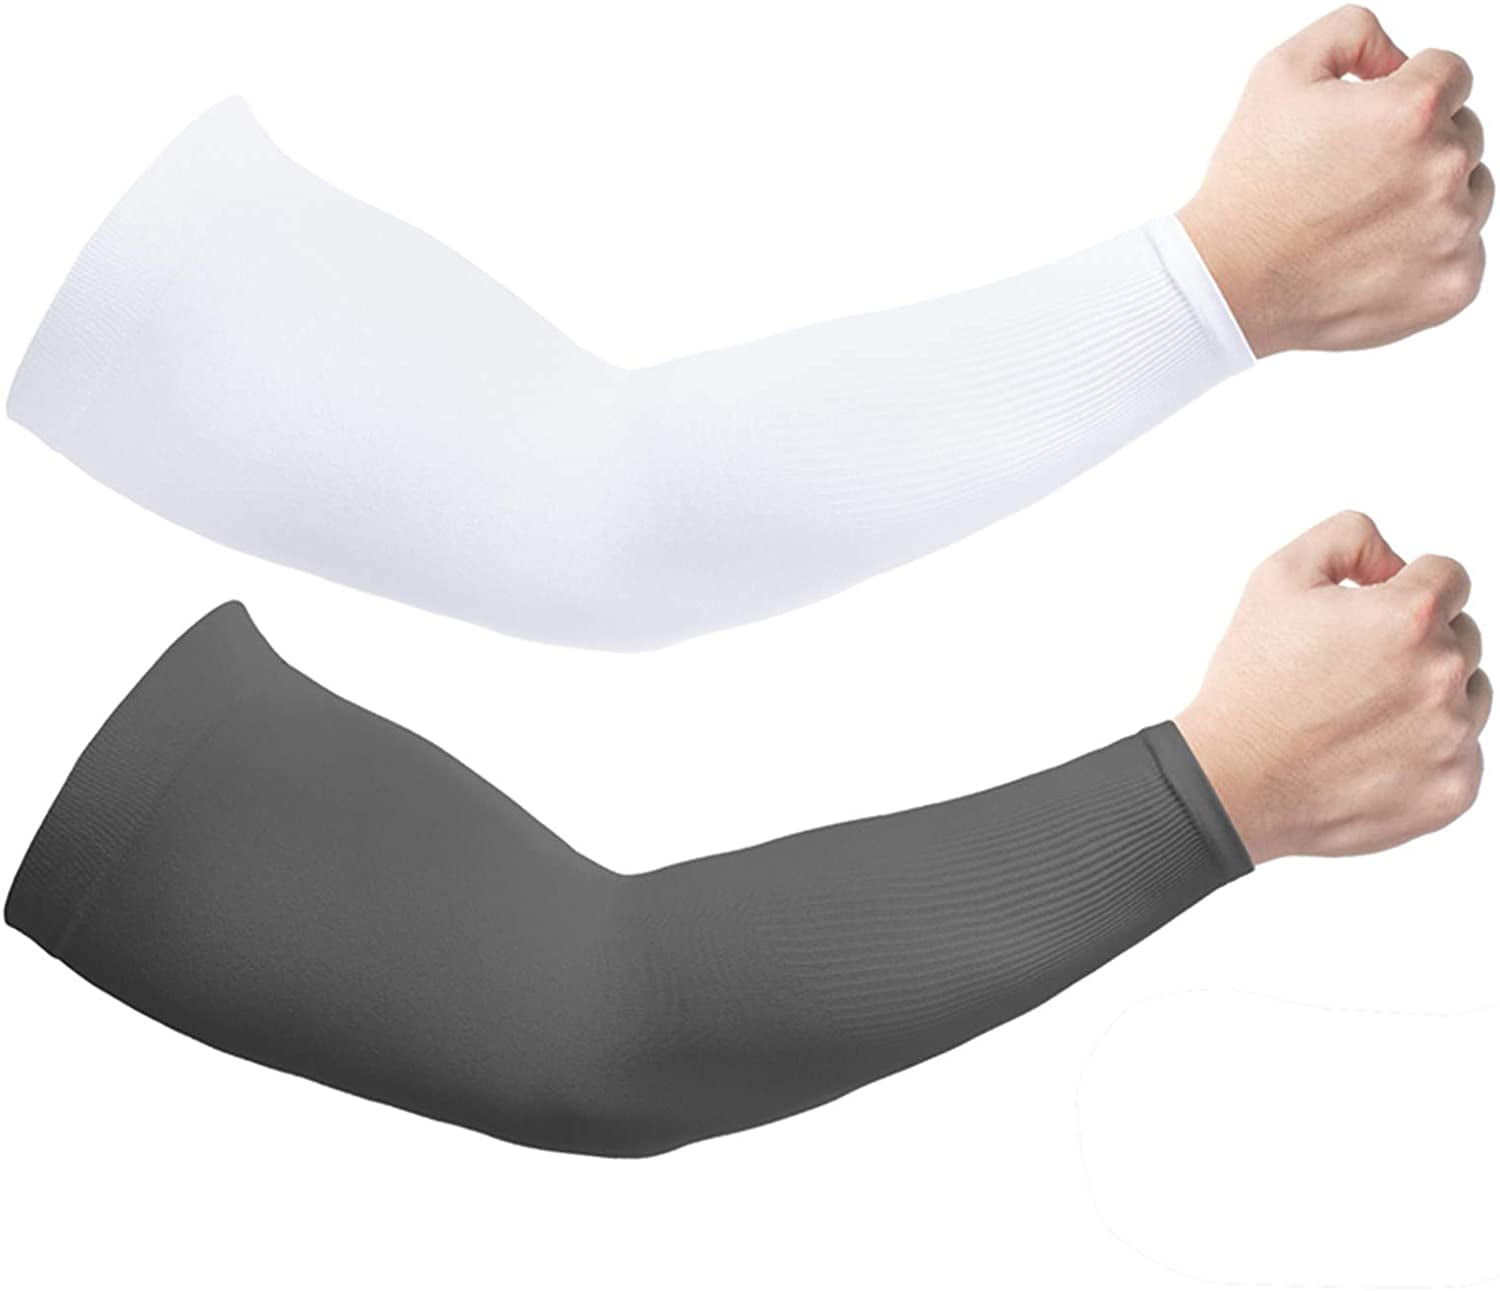 2 pairs Cooling Arm Sleeves Cover UV Sun Protection Basketball Sport White&Black 